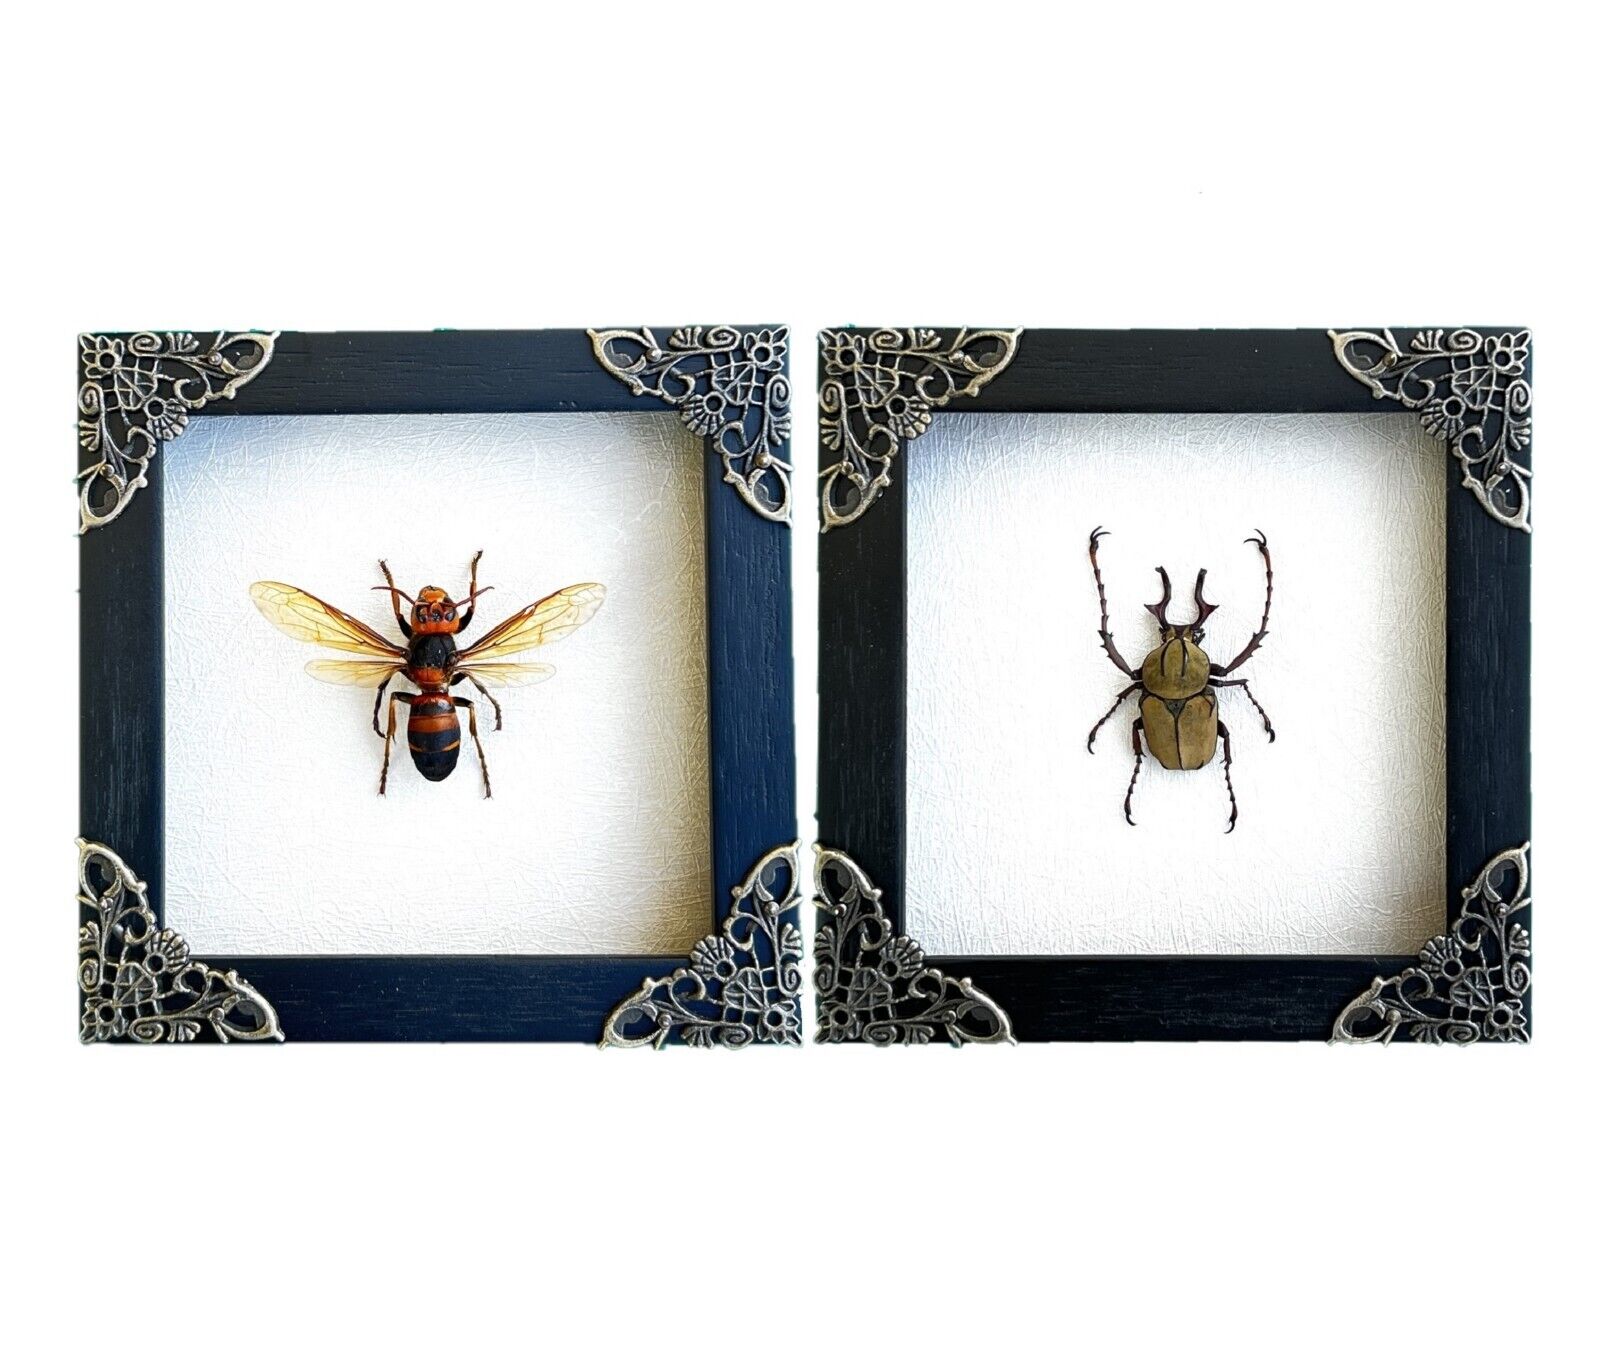 2 Real Framed Wasp Beetle Wooden Shadow Box Dead Insect Dried Bug Taxidermy